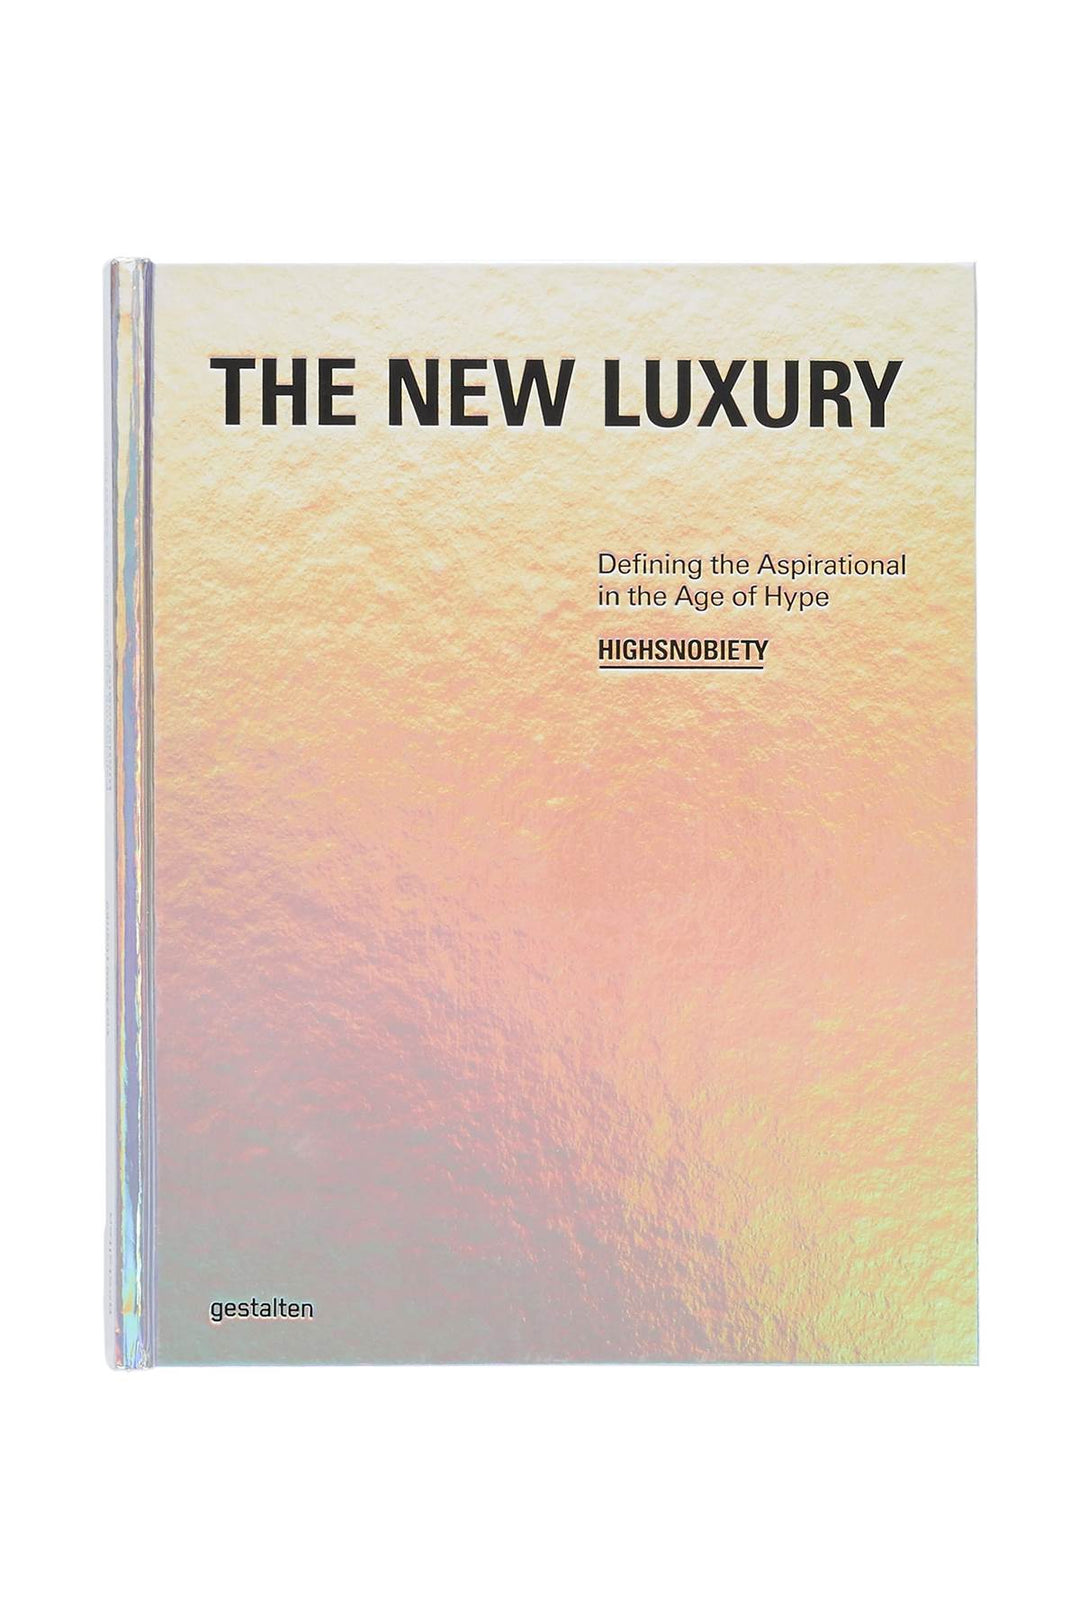 New mags the new luxury - highsnobiety: defining the aspirational in the age of hype-0